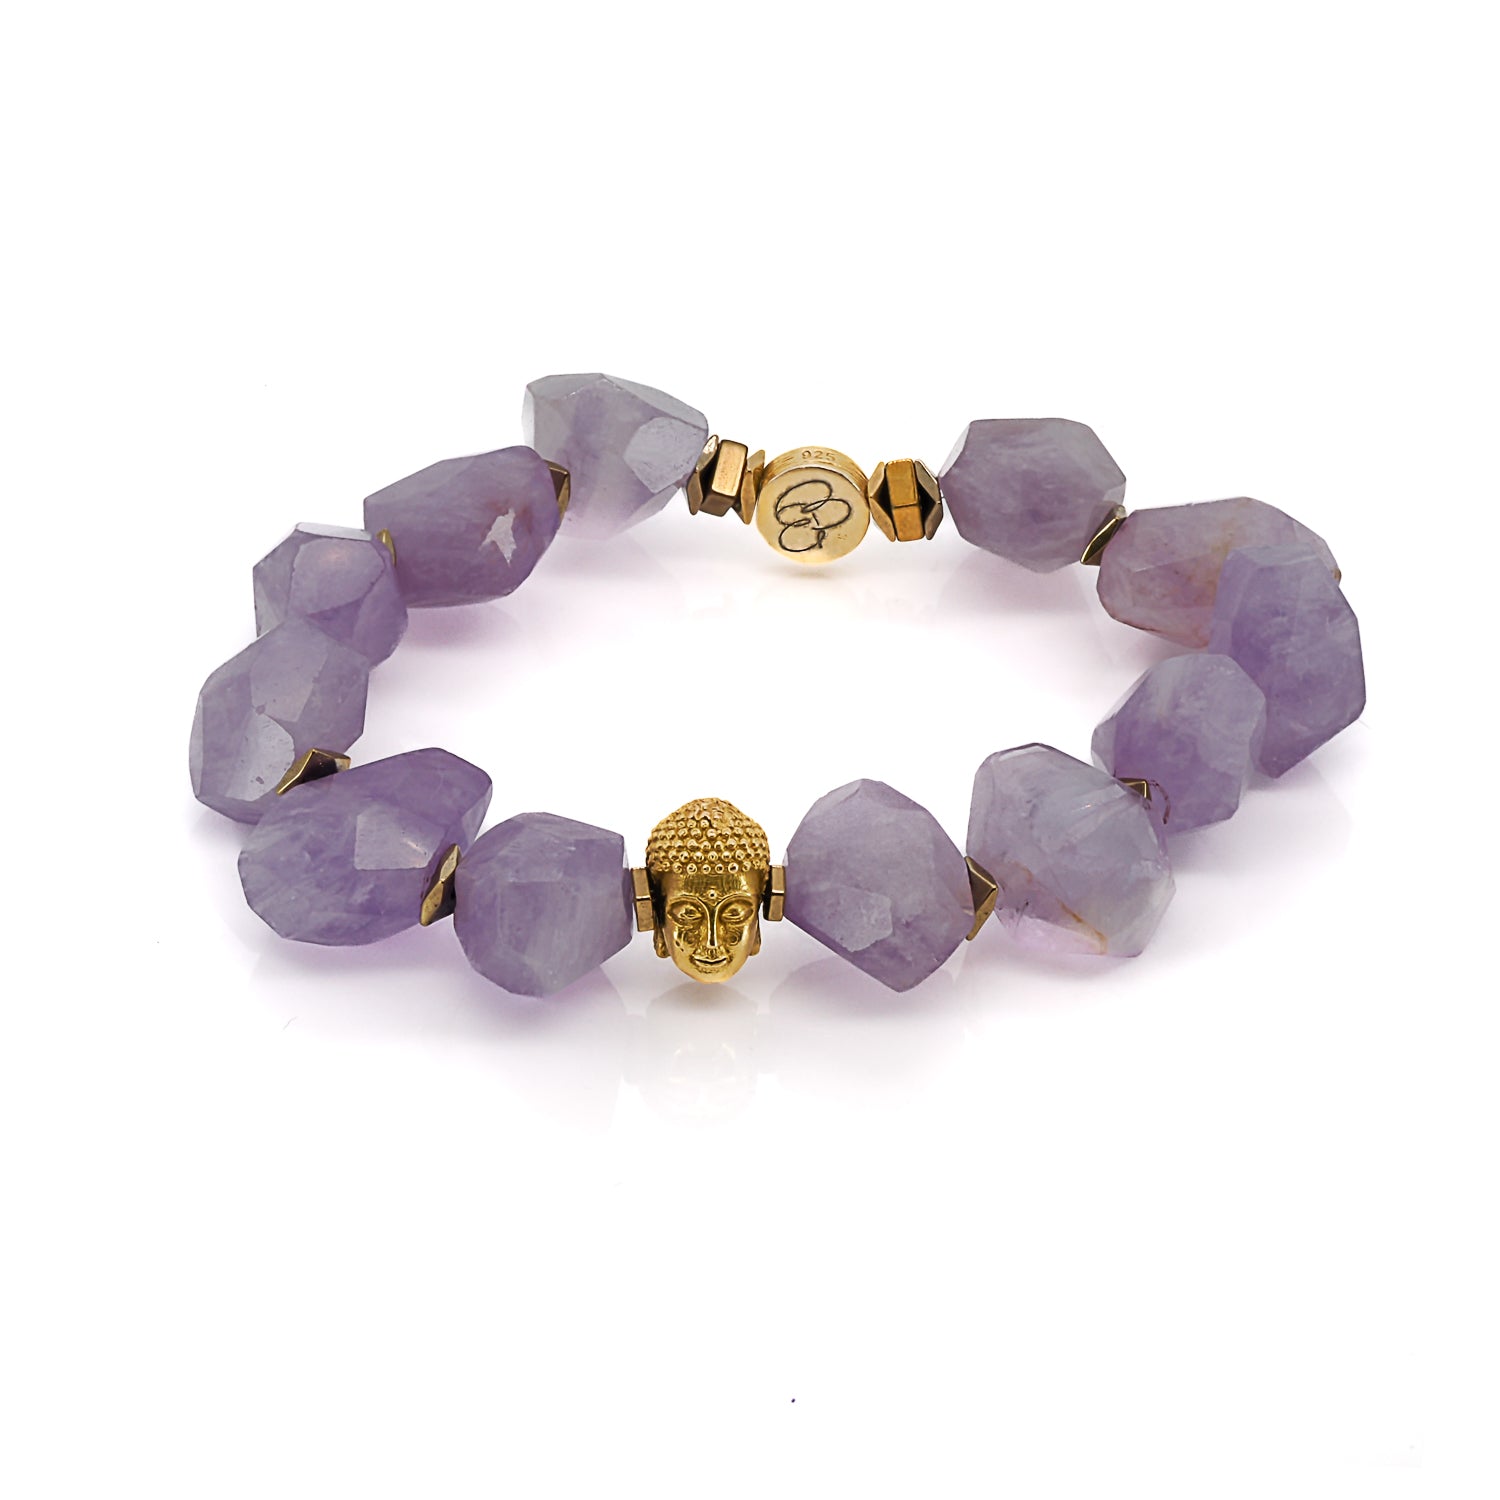 The bracelet's core comprises stunning amethyst stone beads, renowned for their calming and protective properties, making it an ideal choice for those seeking balance and inner peace.